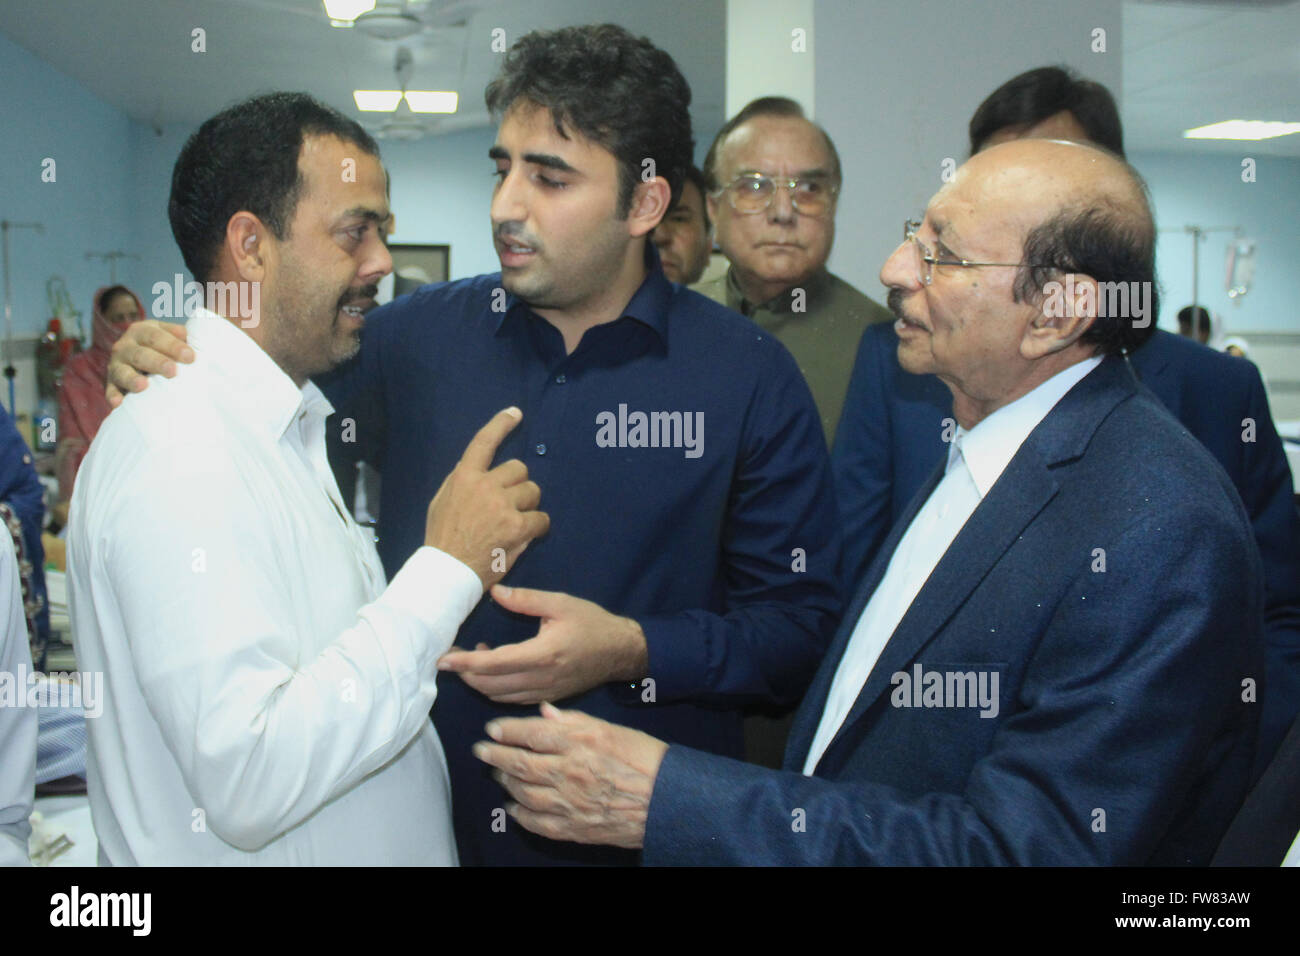 Lahore, Pakistan. 16th Dec, 2014. Pakistan Peoples Party (PPP) Chairman, Bilawal Bhutto Zardari visits and inquires about the health of injured victims of suicidal bomb blast at Gulshan-e-Iqbal Park at Jinnah Hospital. © Rana Sajid Hussain/Pacific Press/Alamy Live News Stock Photo